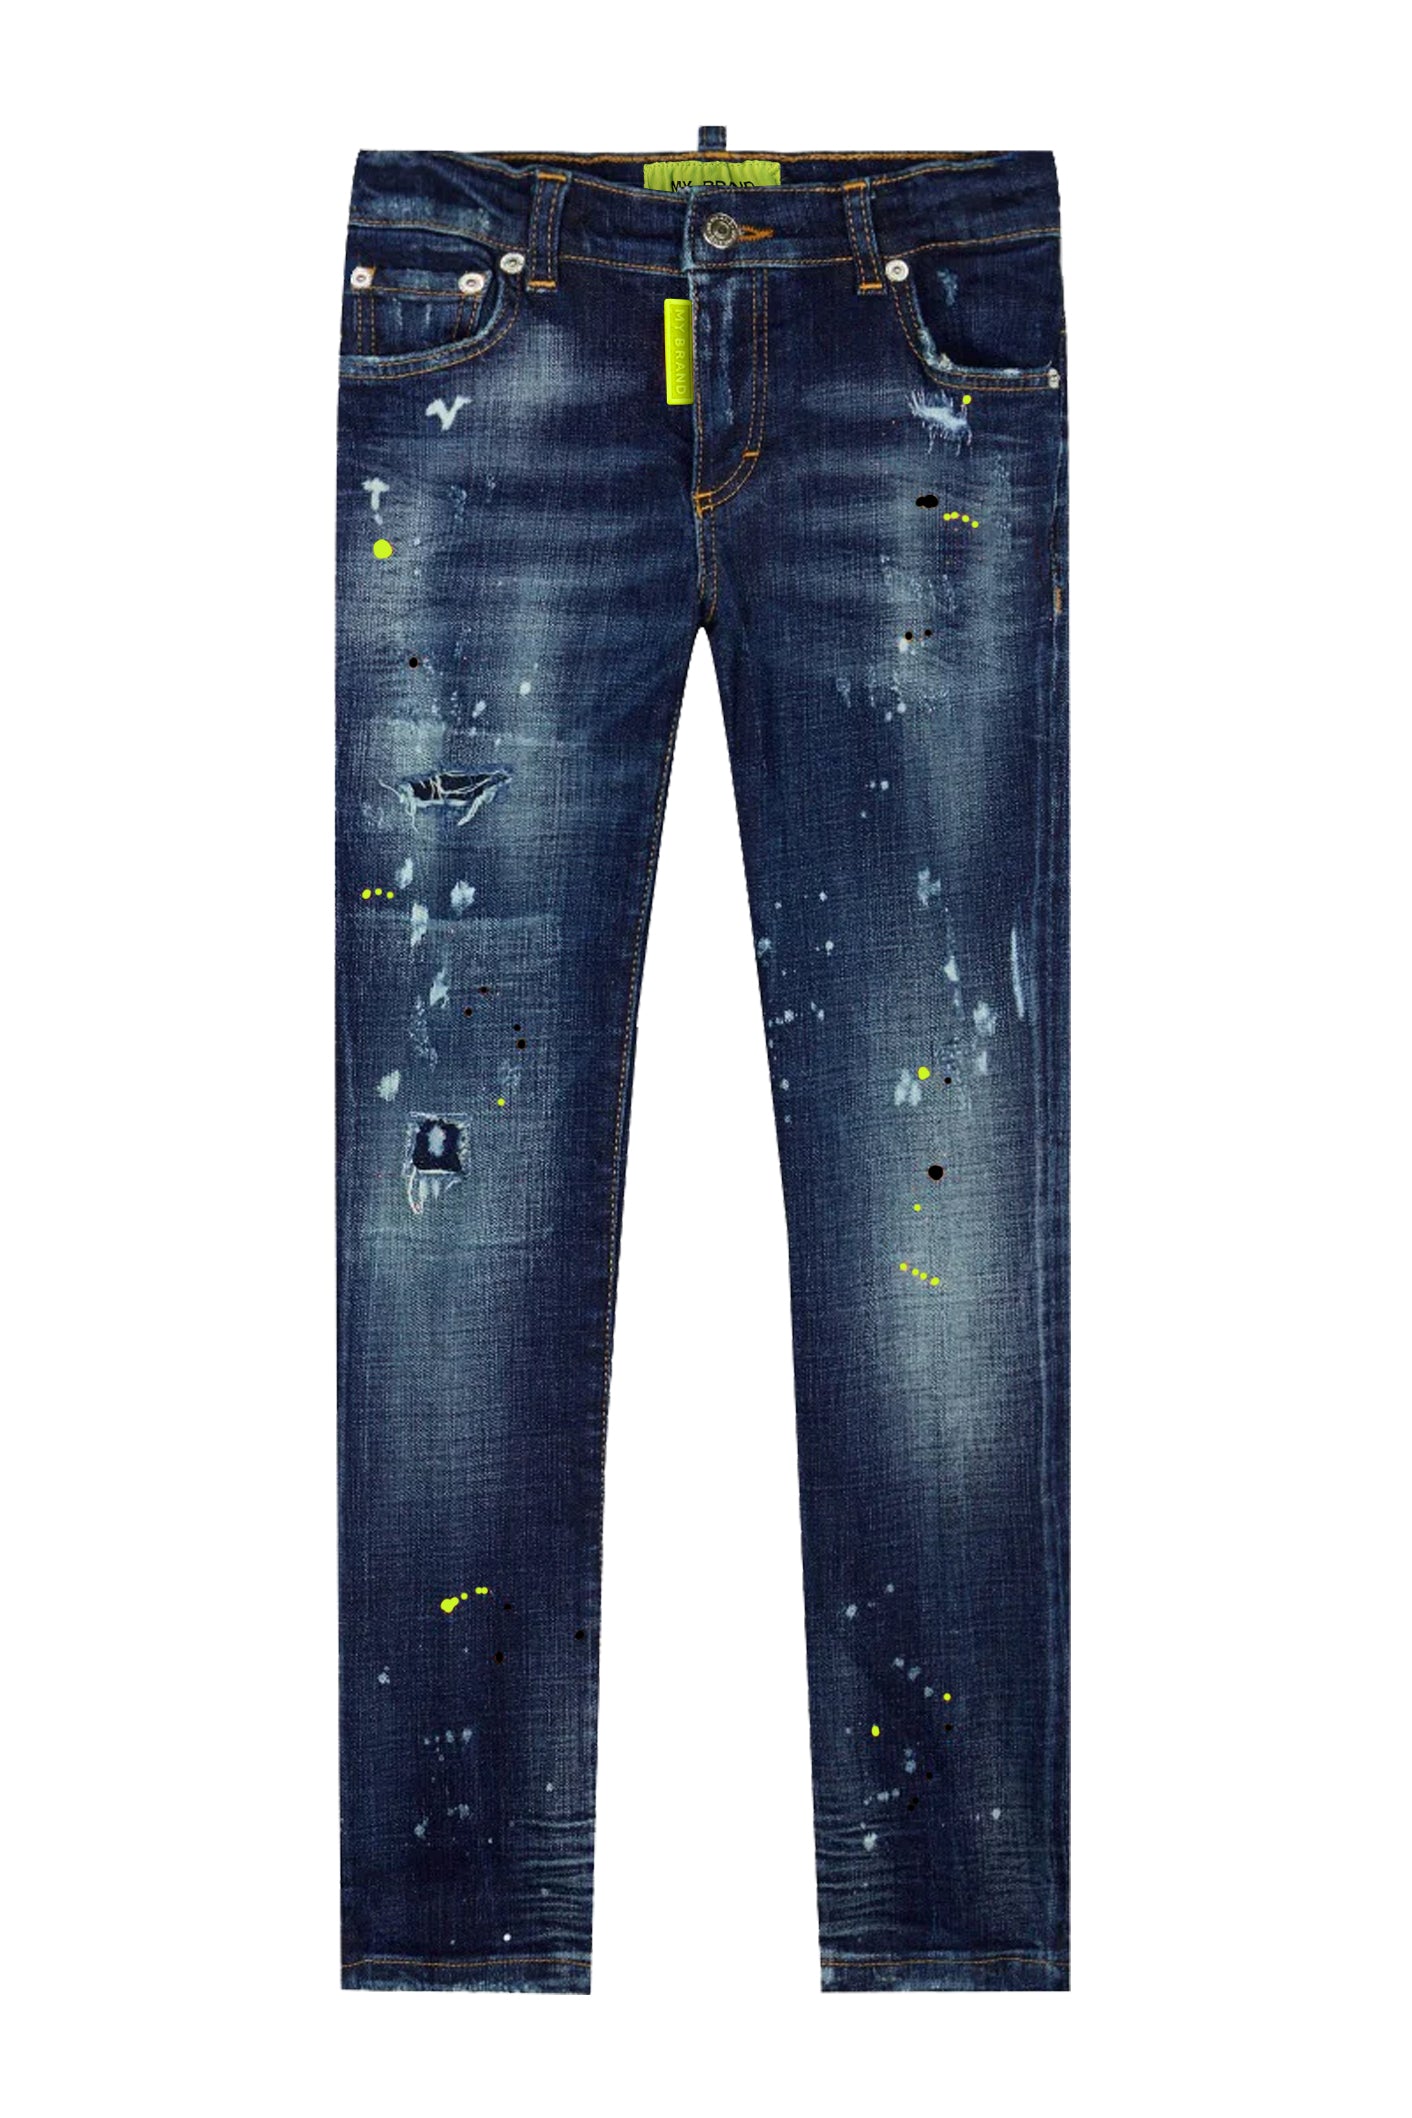 Blue Distressed Neon Yellow Jeans